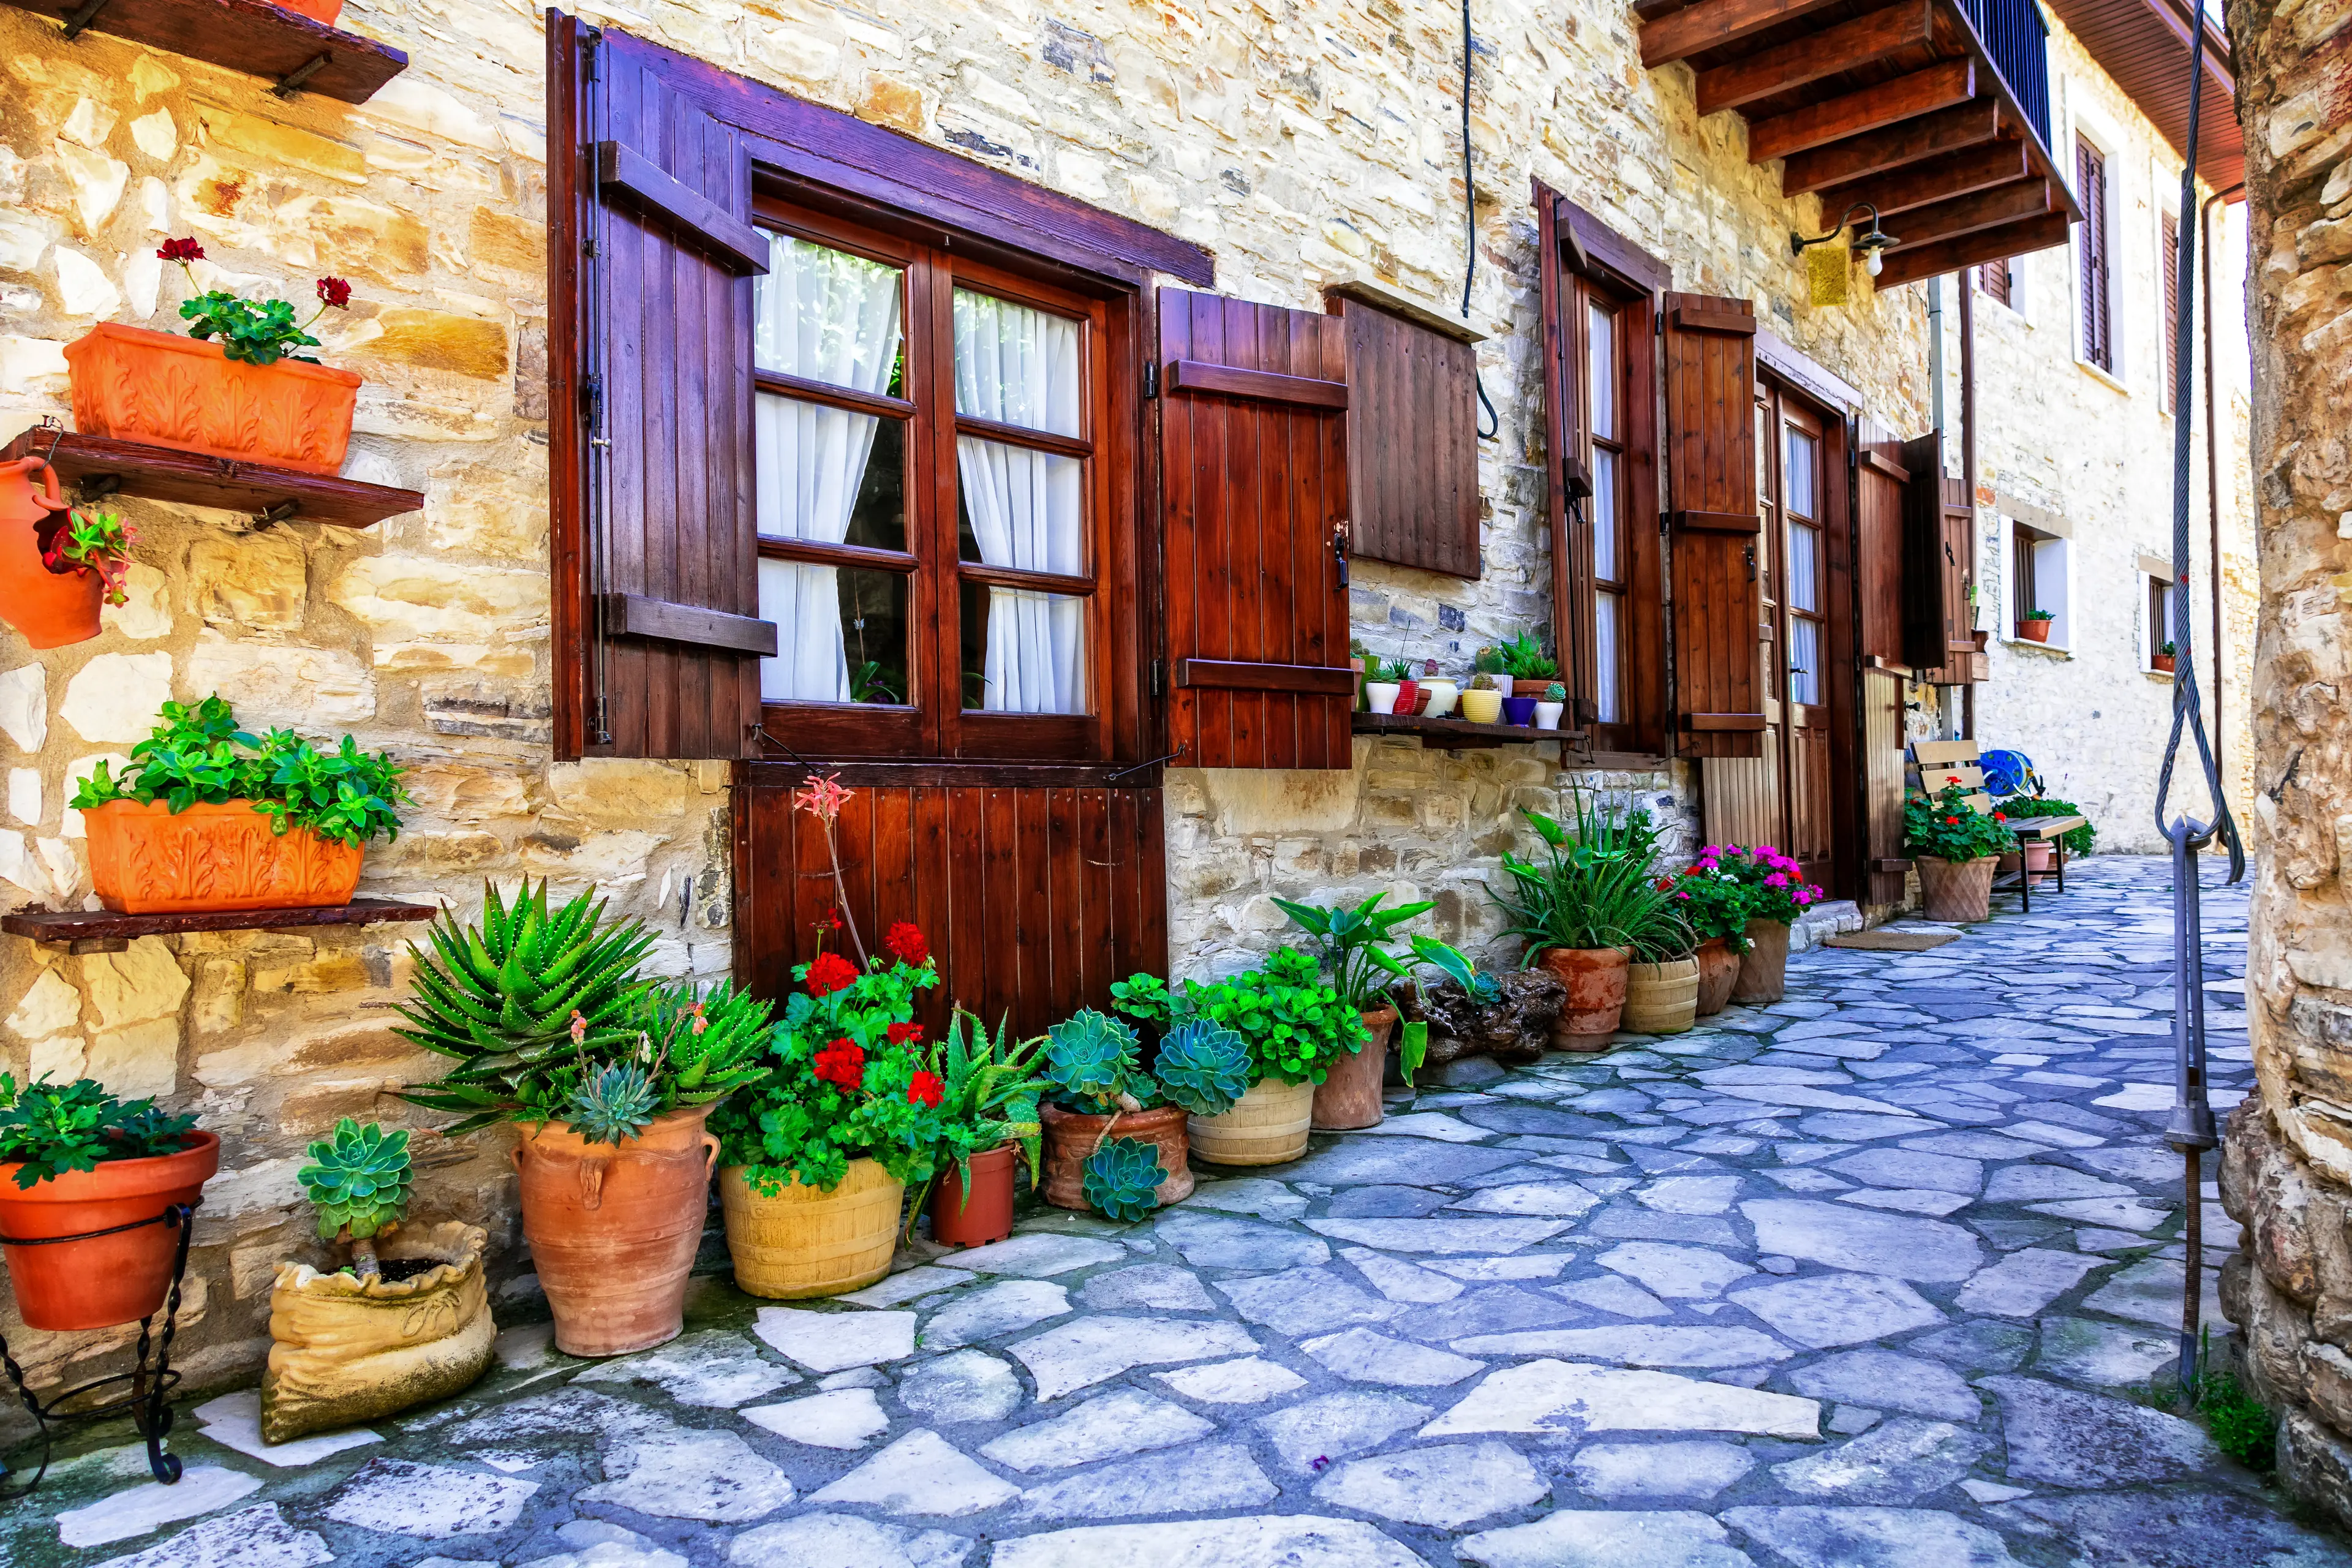 Pots with plants lined up outside a traditional stone house in Lefkara